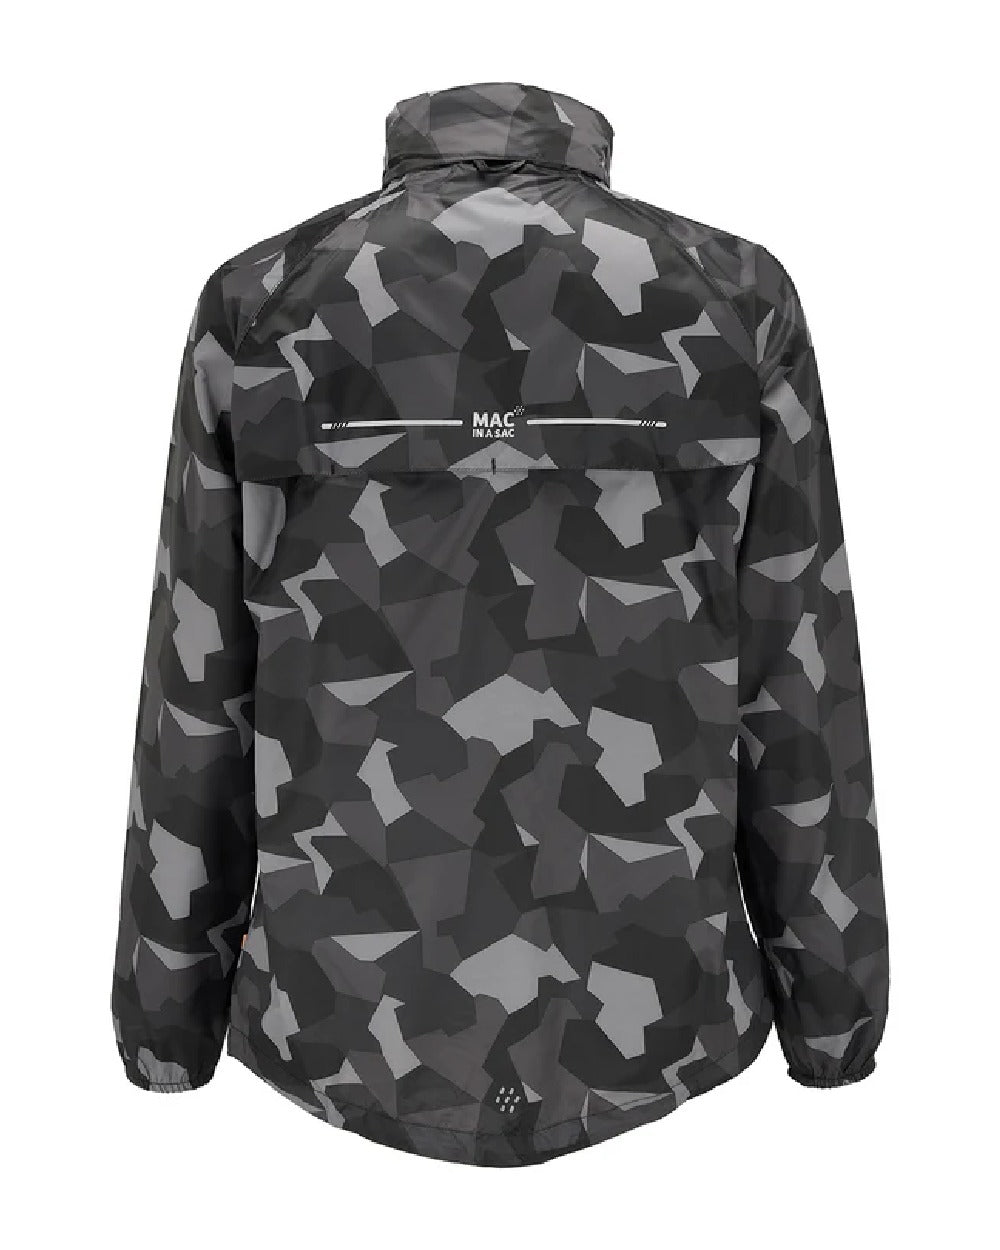 Black Camo coloured Mac In A Sac Packable Origin Camo Waterproof Jacket on white background 